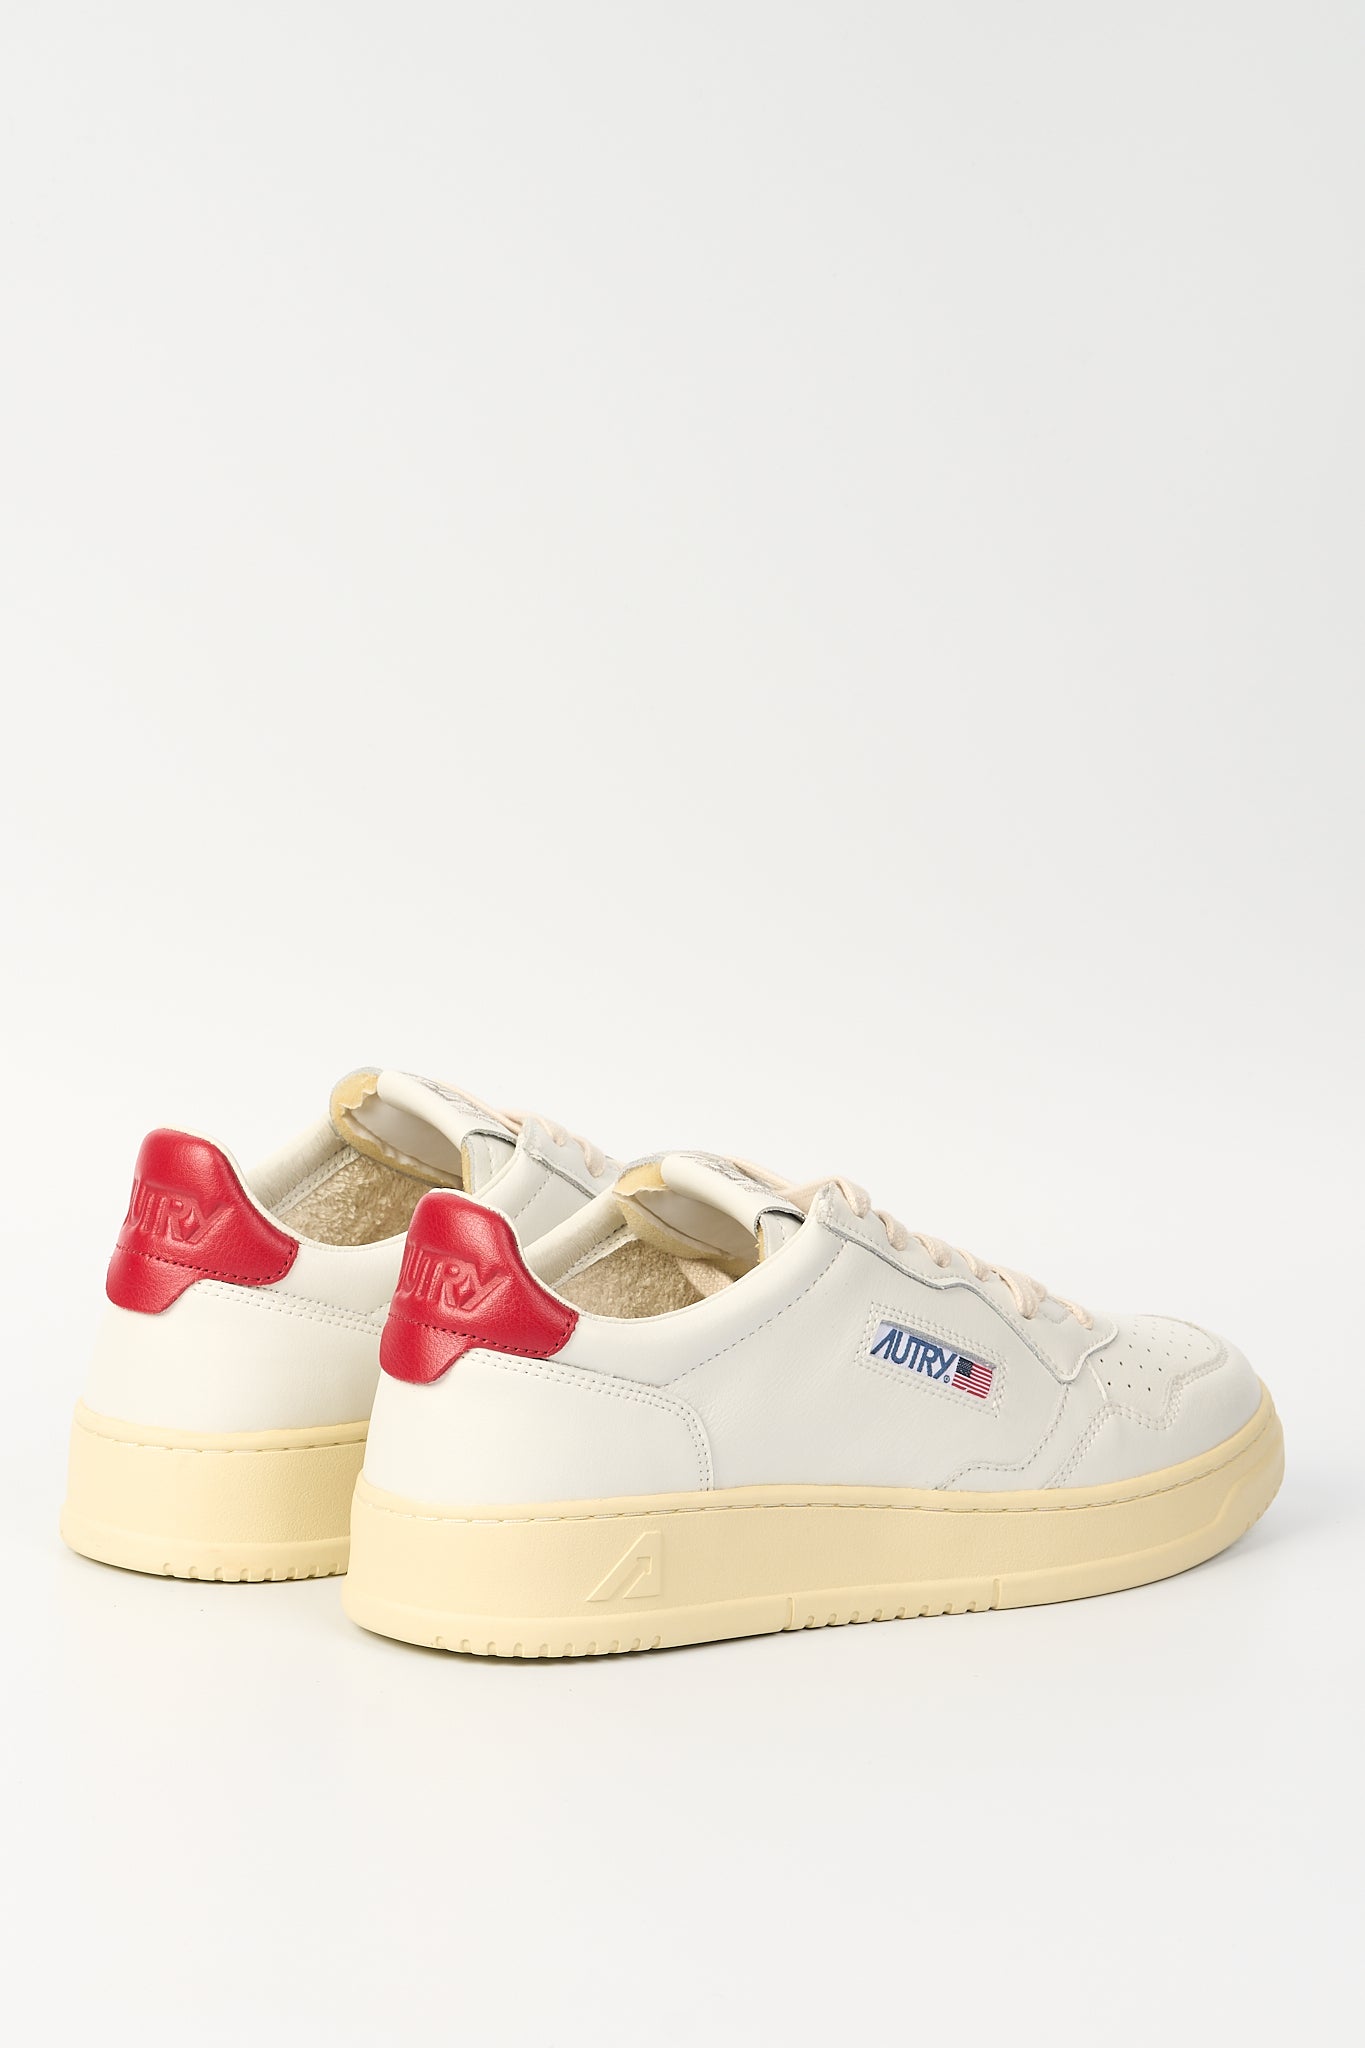 Autry Sneaker Medalist AULM-LL21 Bianco/rosso Uomo-3